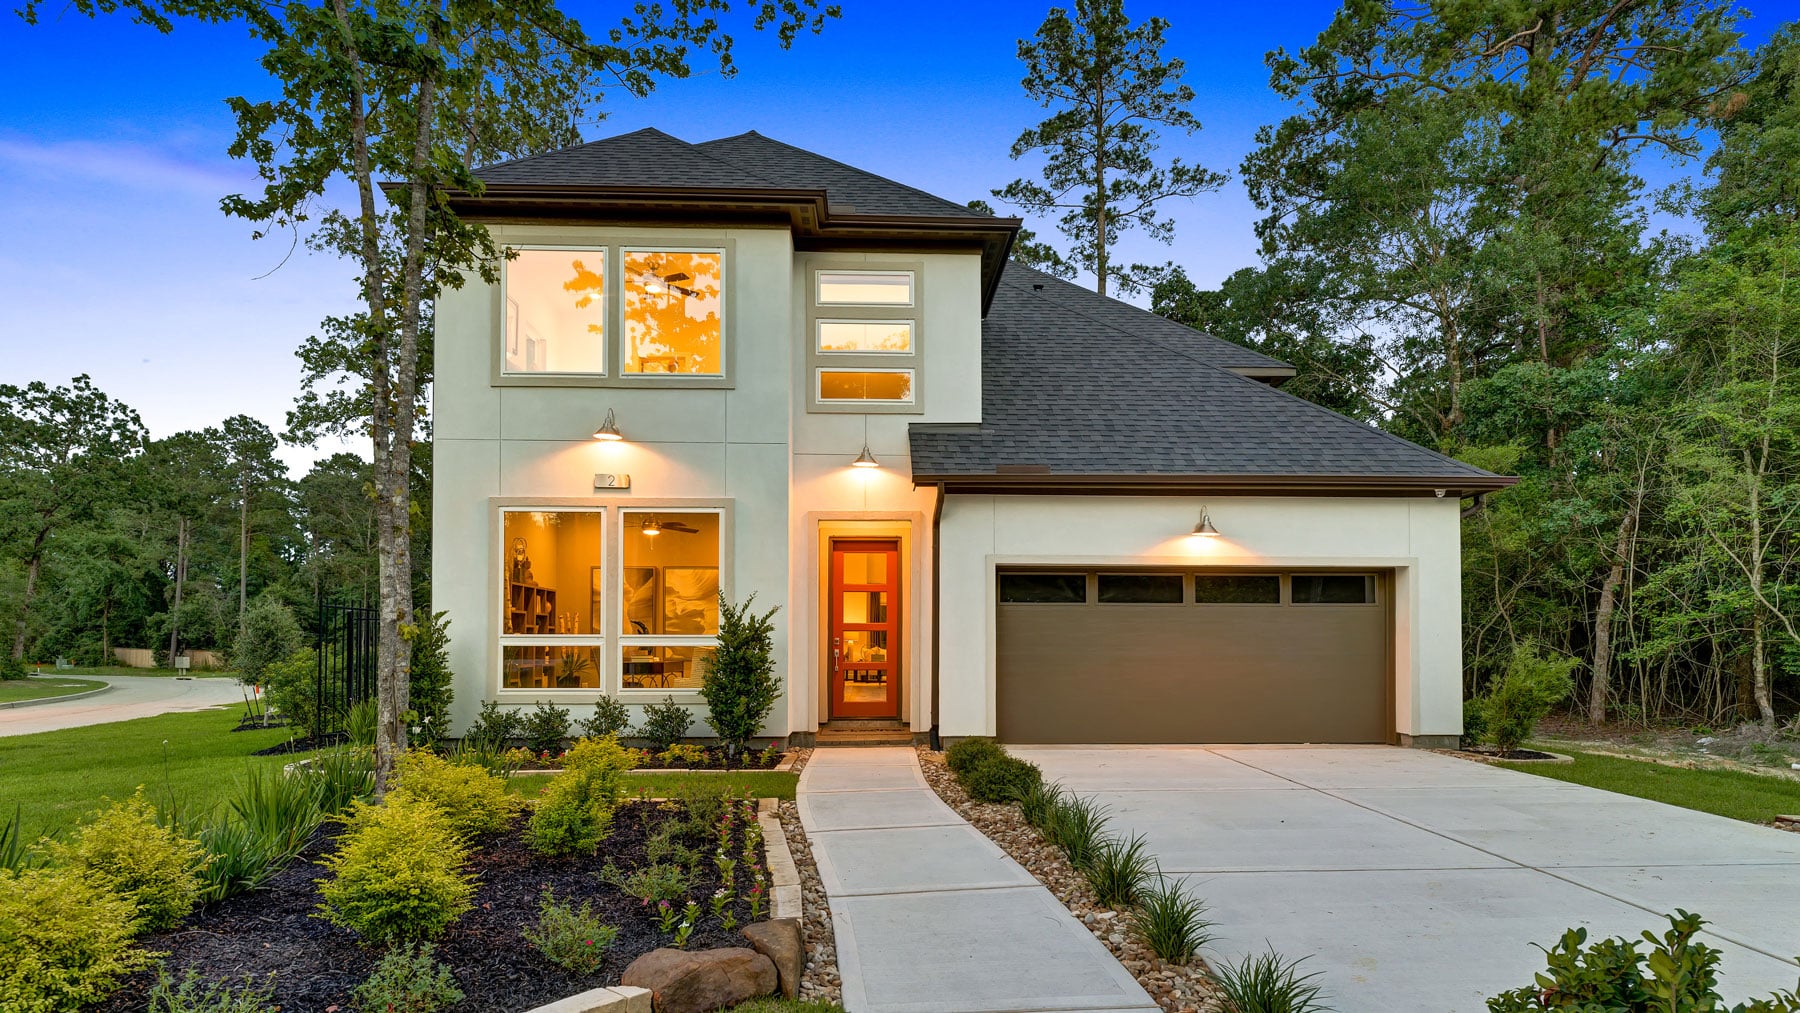 The Woodlands, TX Real Estate & Homes for Sale